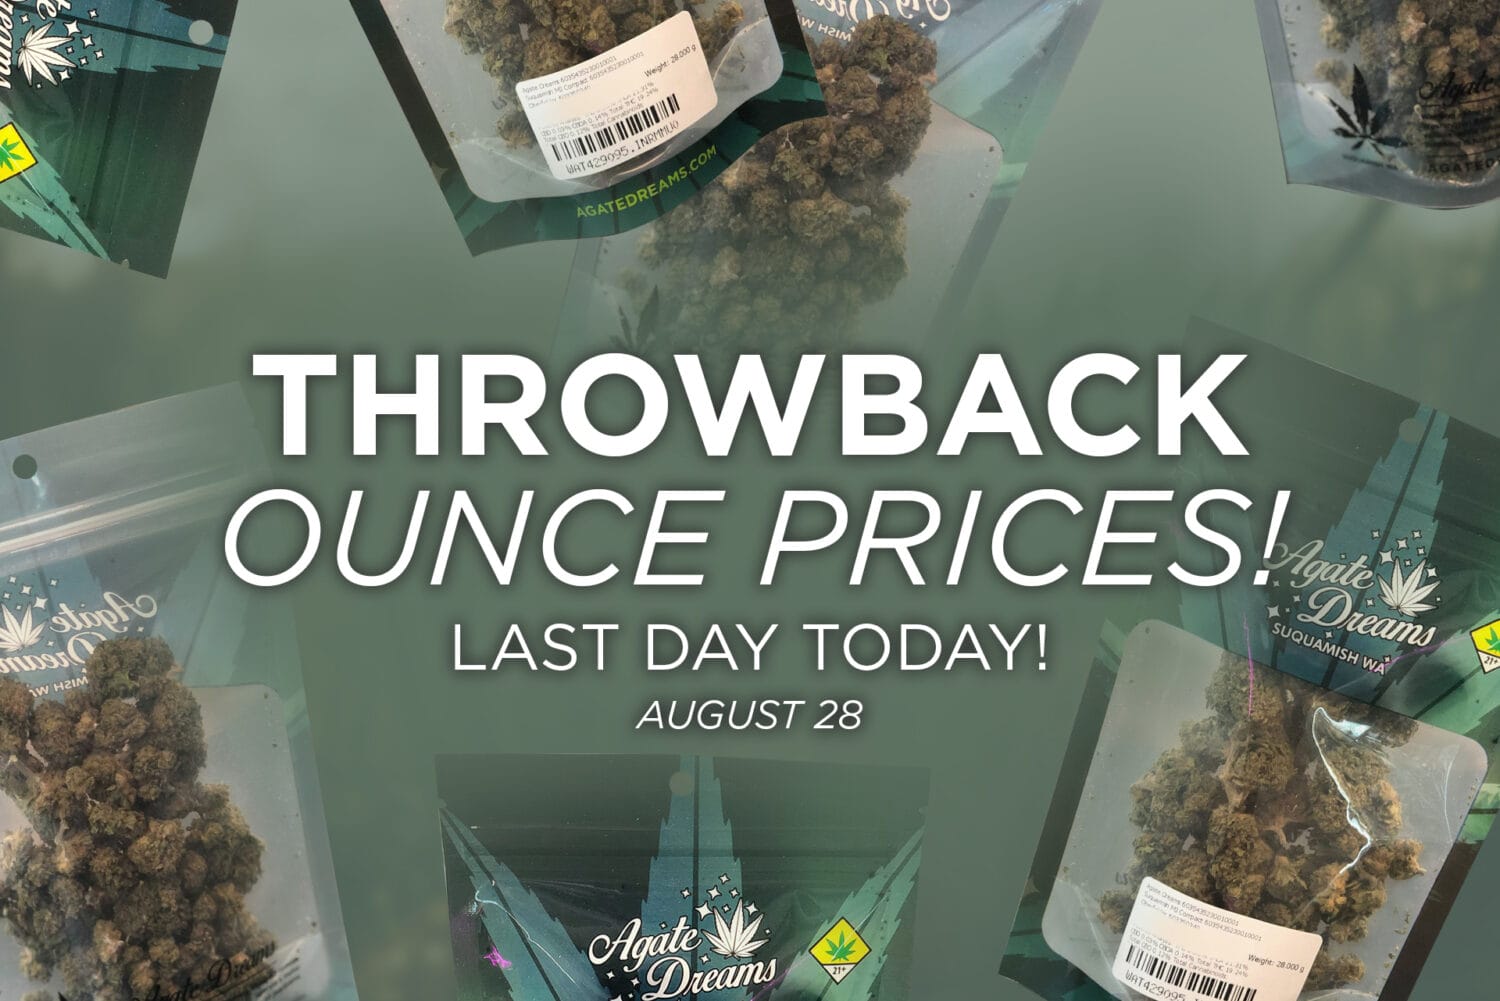 Throwback Ounce Sale Last Day